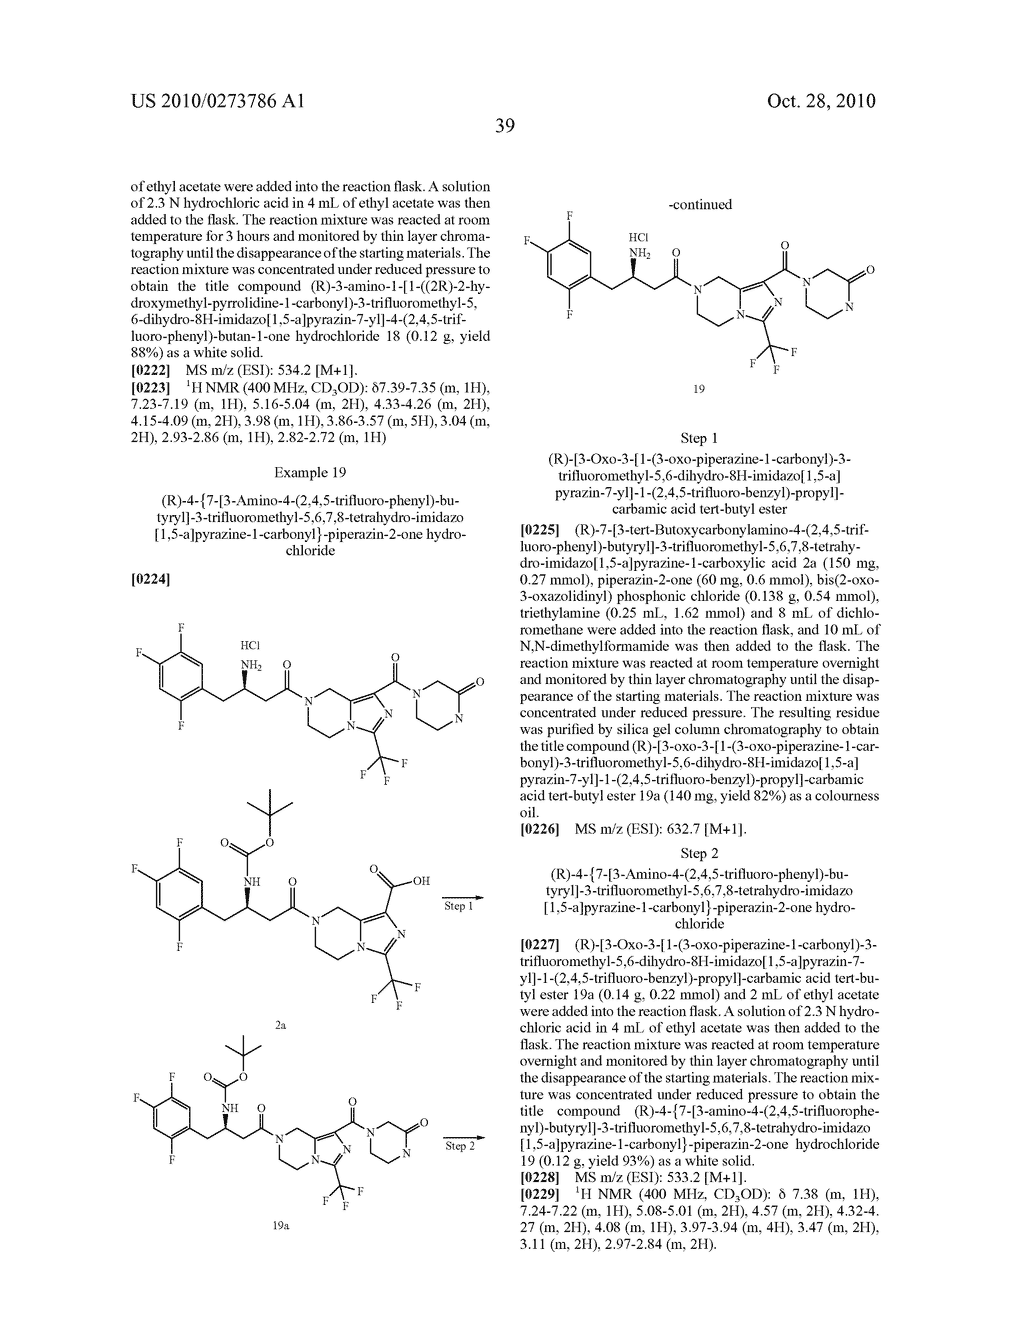 TETRAHYDRO-IMIDAZ0[1,5-A]PYRAZINE DERIVATIVES, PREPARATION PROCESS AND MEDICINAL USE THEREOF - diagram, schematic, and image 40